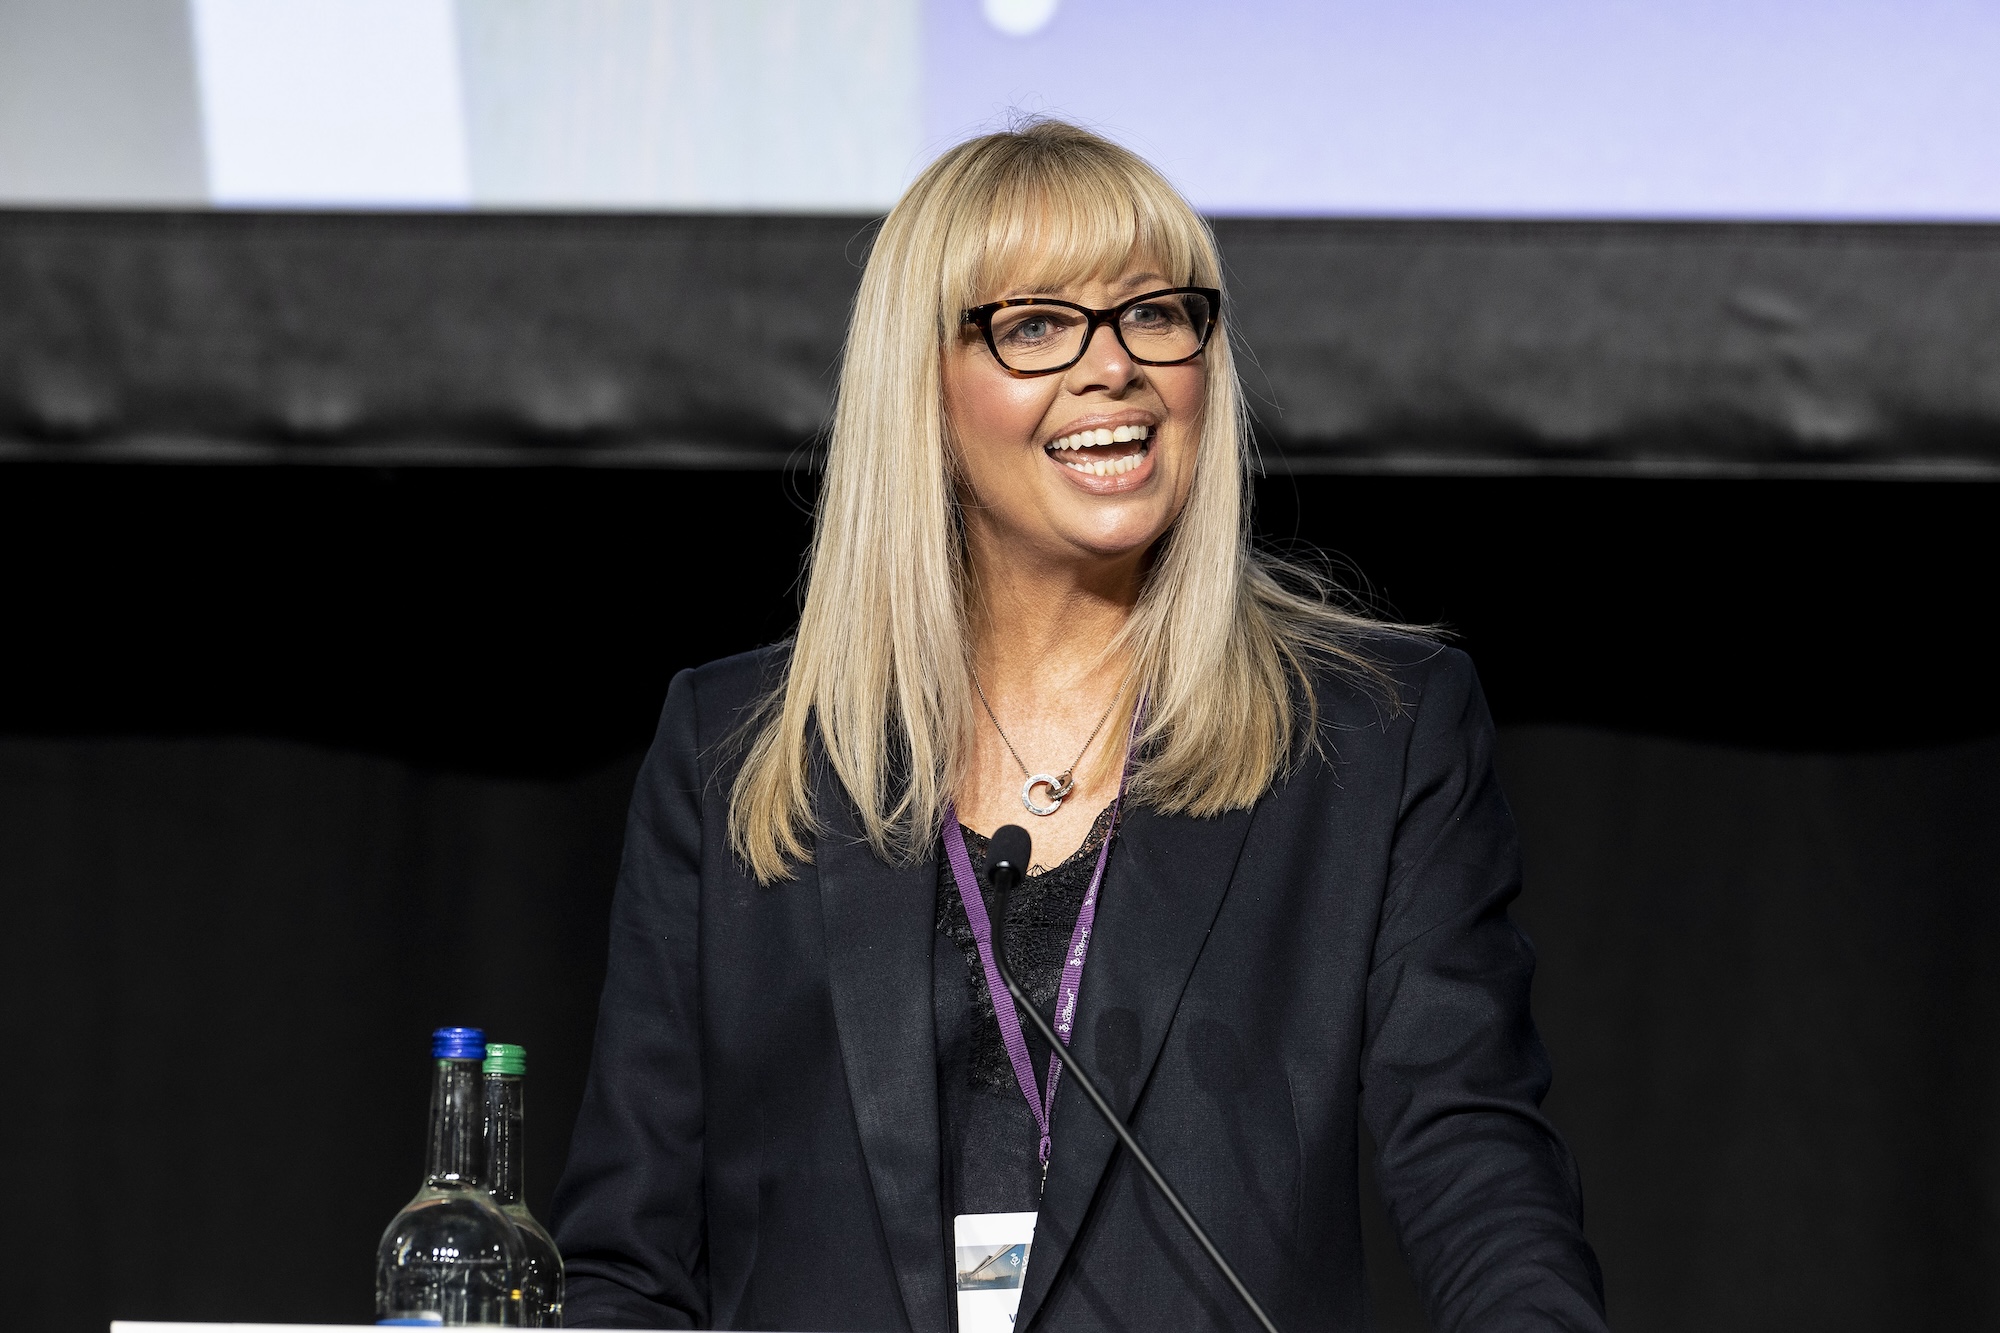 Vicki Miller to lead VisitScotland as next CEO